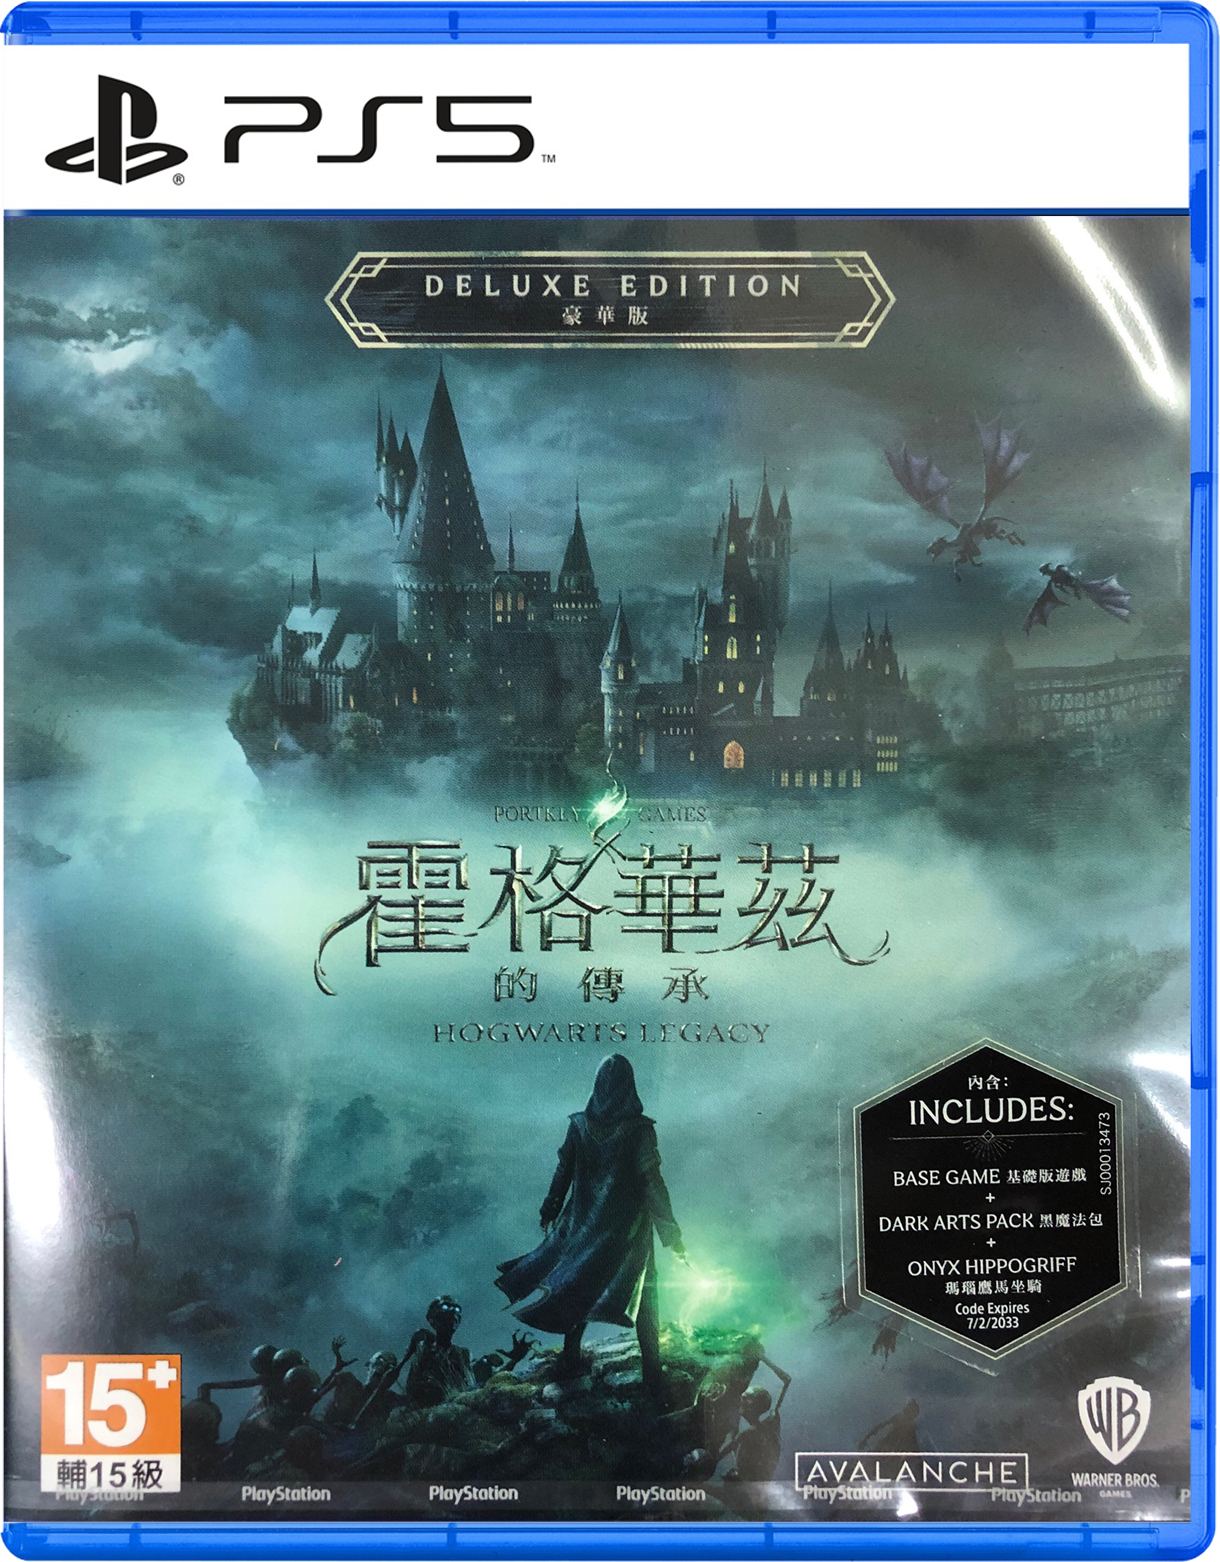 Hogwarts Legacy [Deluxe Edition] (English) for PlayStation 5